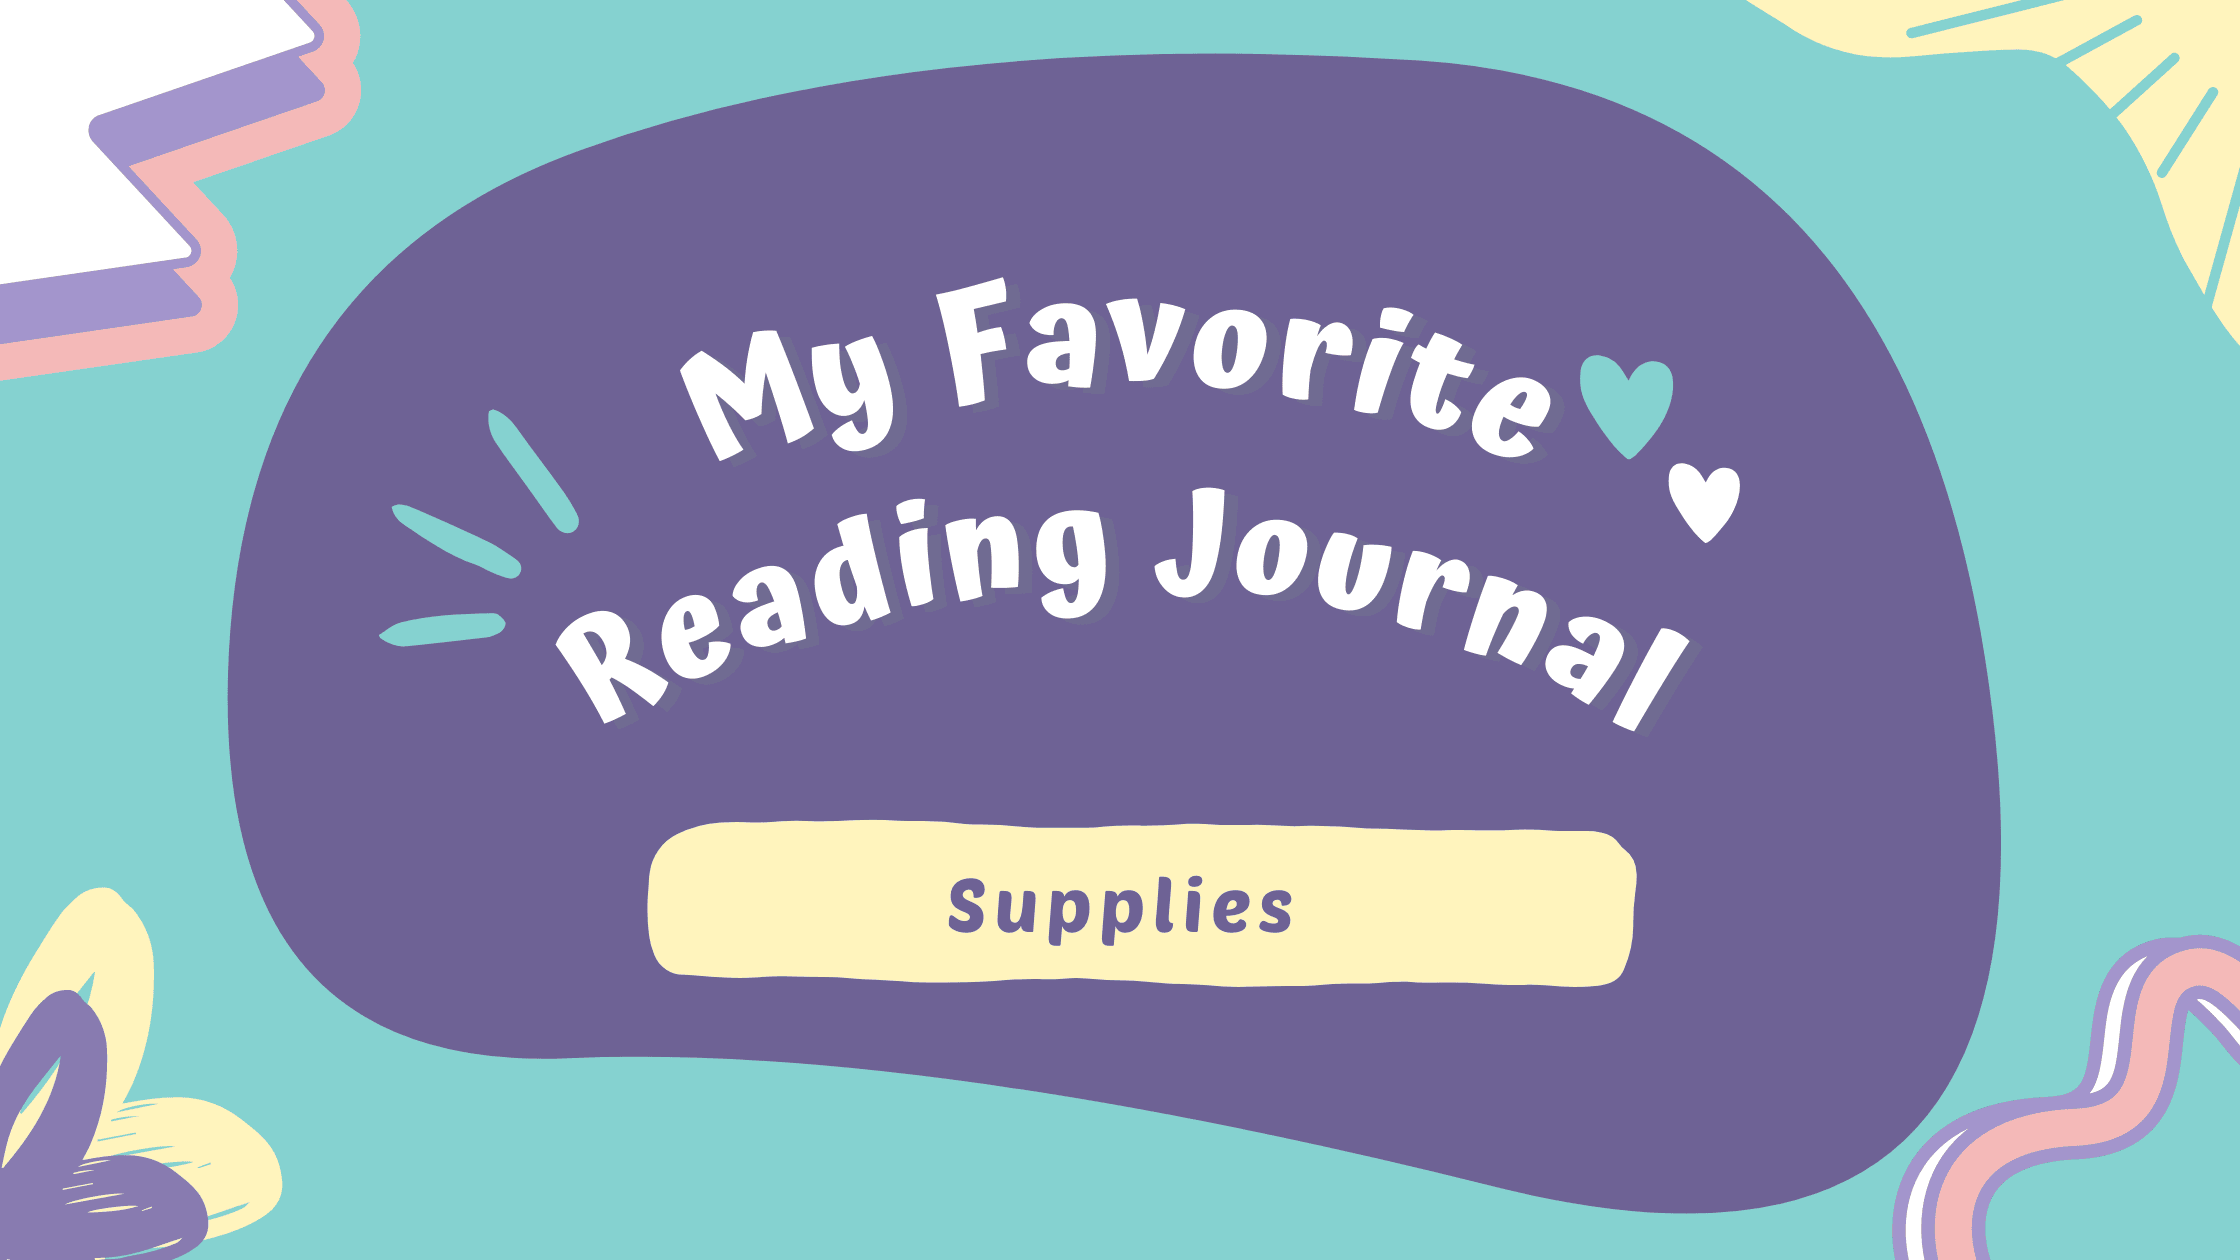 my favorite reading journal supplies graphic